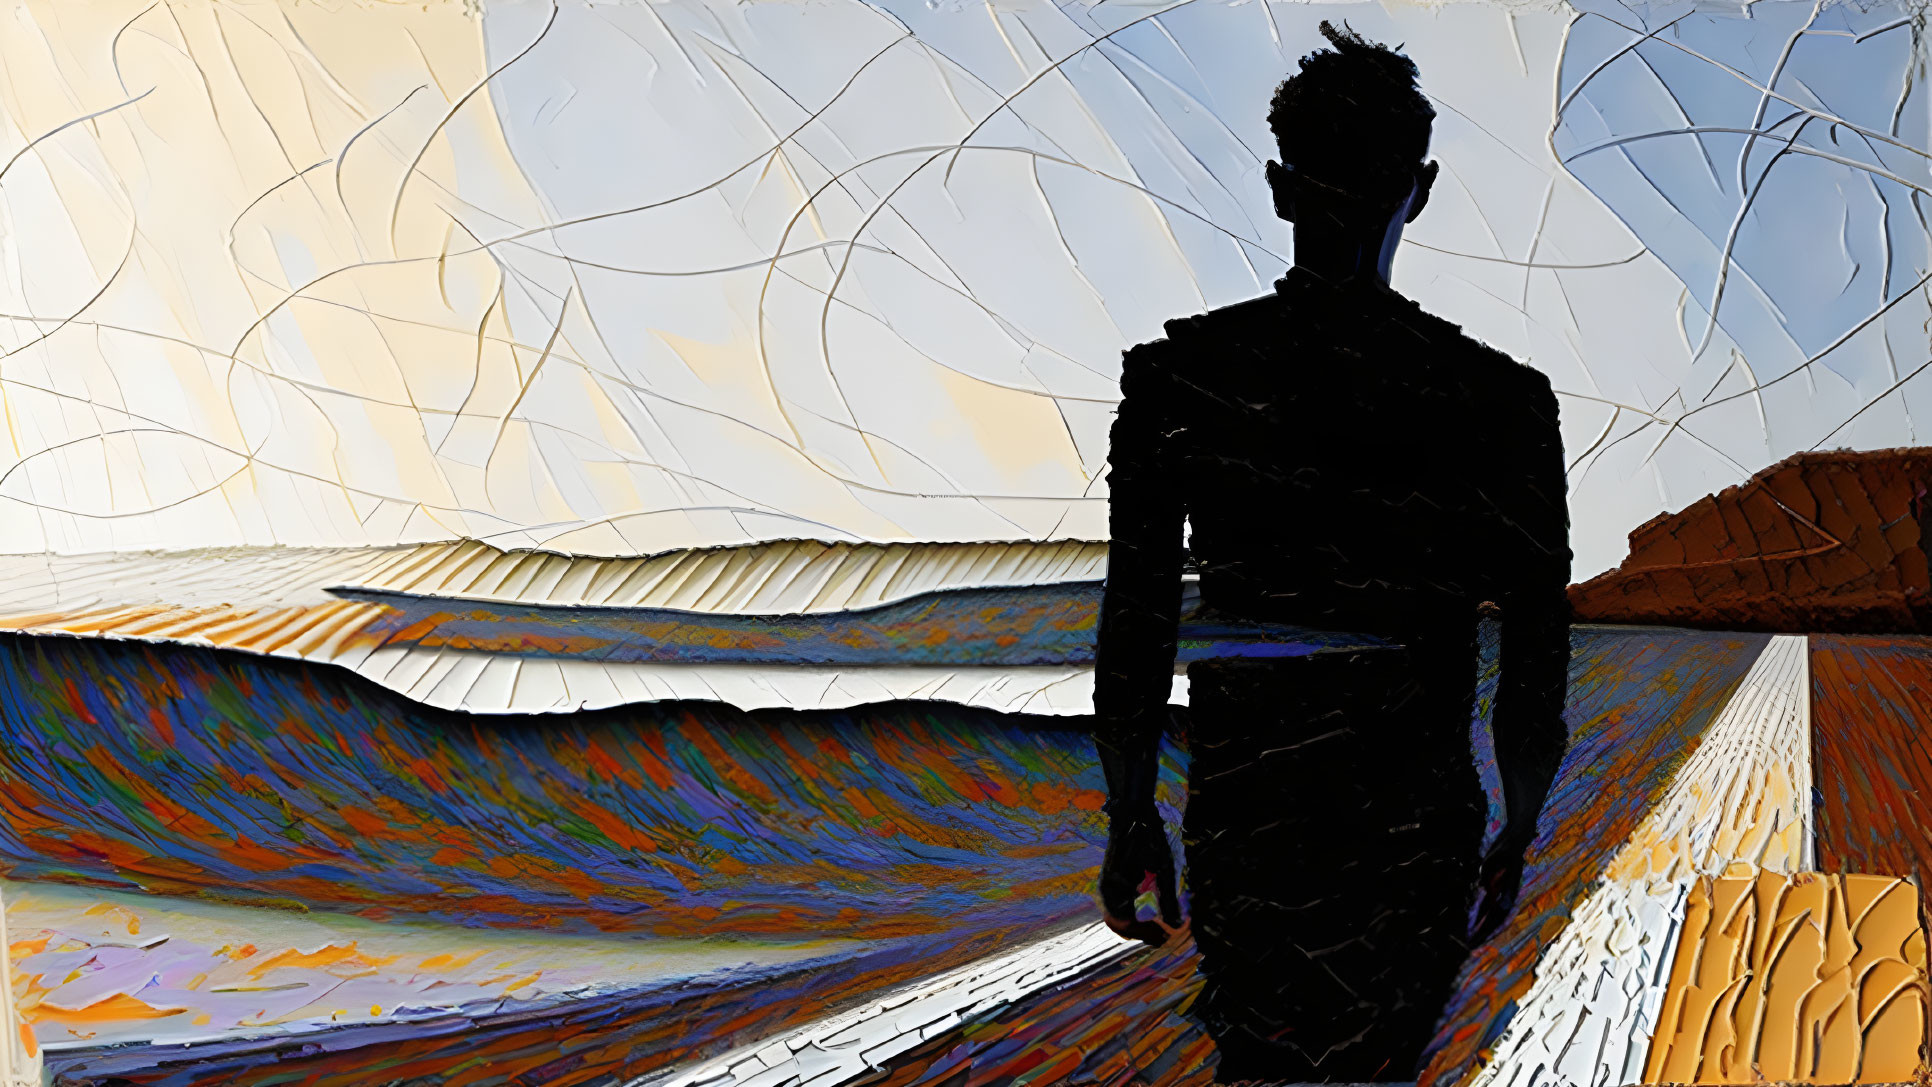 Abstract landscape with silhouetted figure in swirling sky.